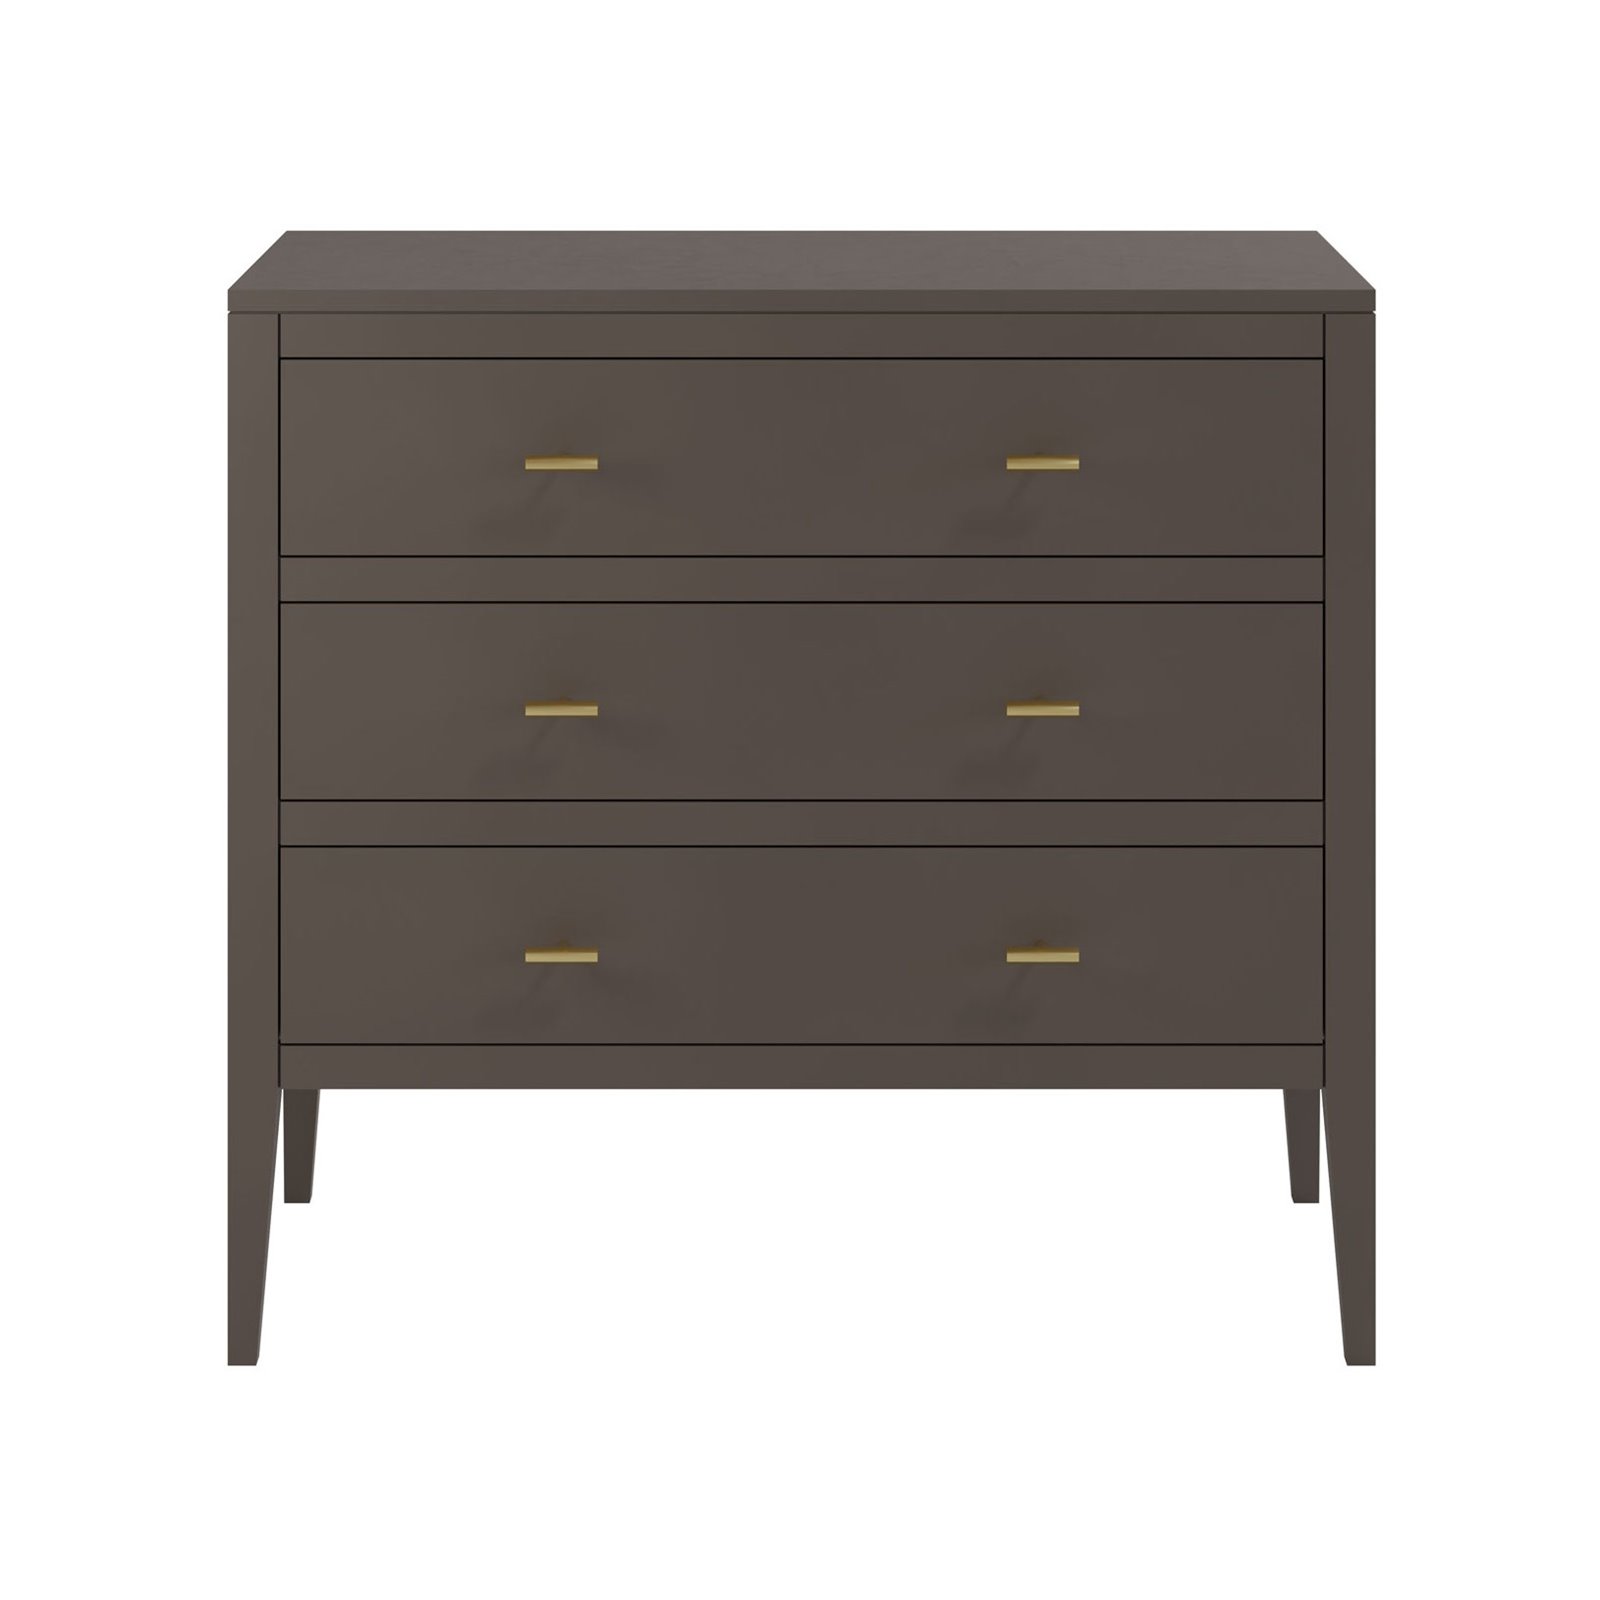 Henley Chest of Drawers Image